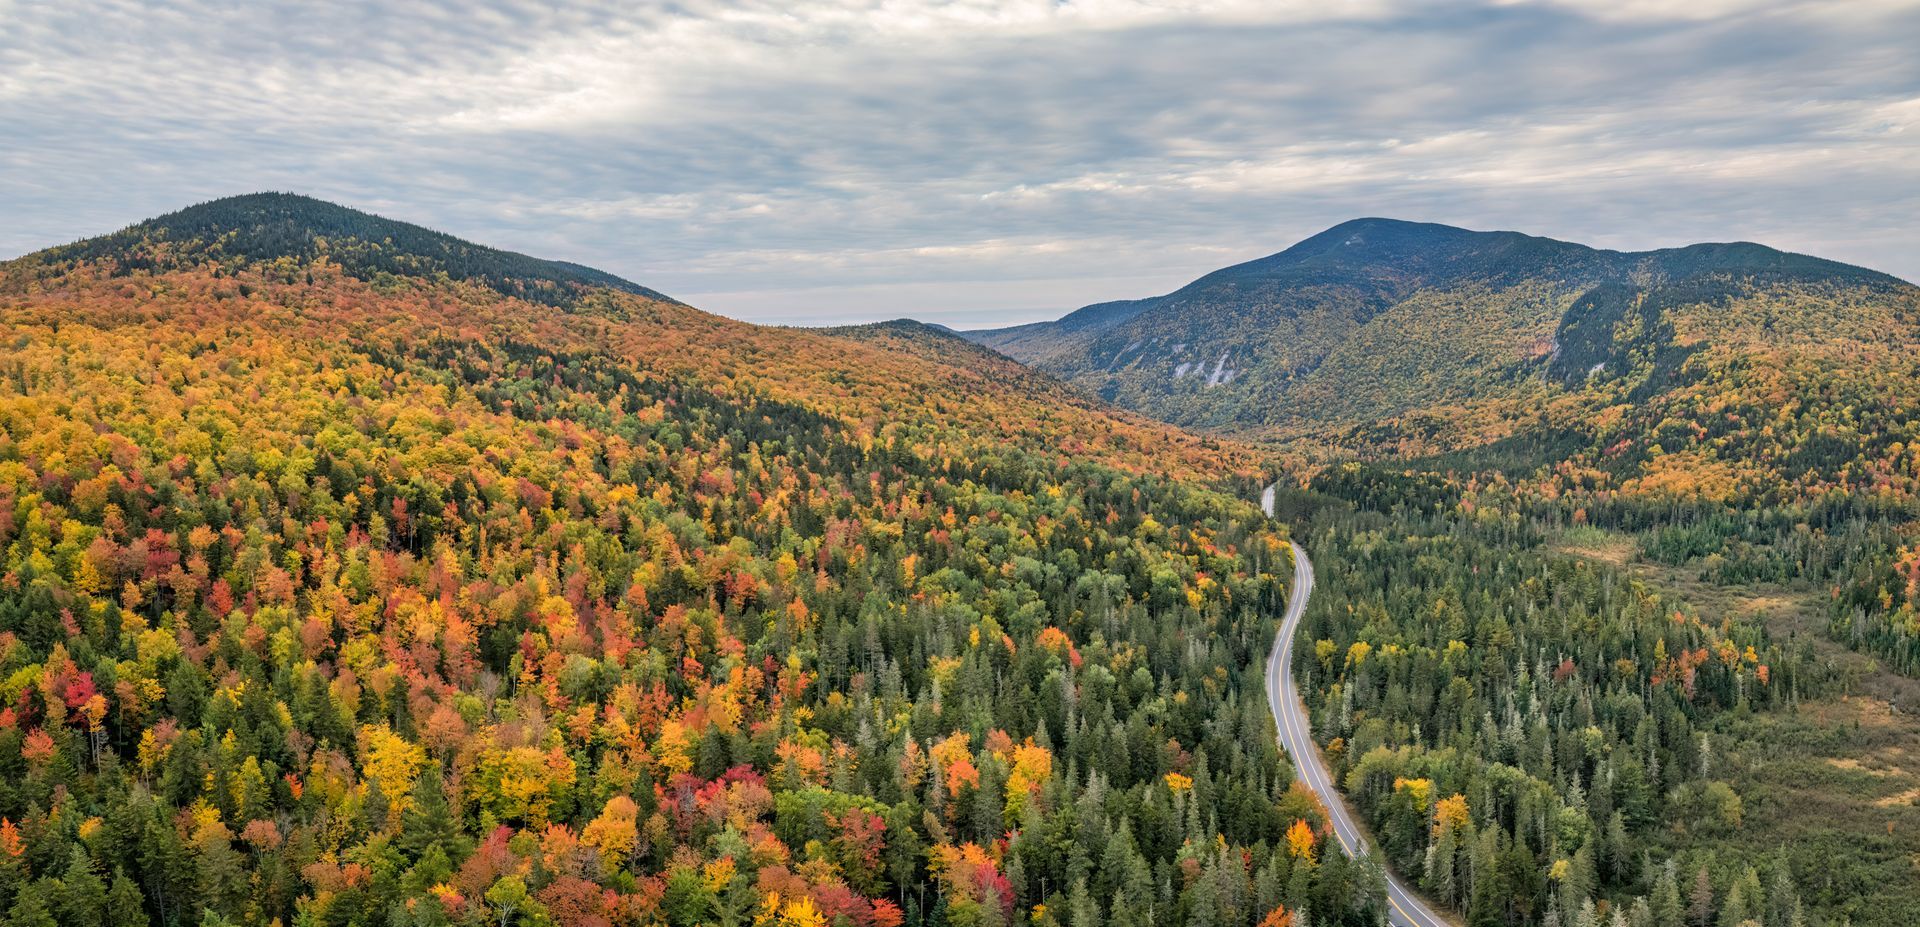 An aerial view of a road going through a forest with mountains in the background.